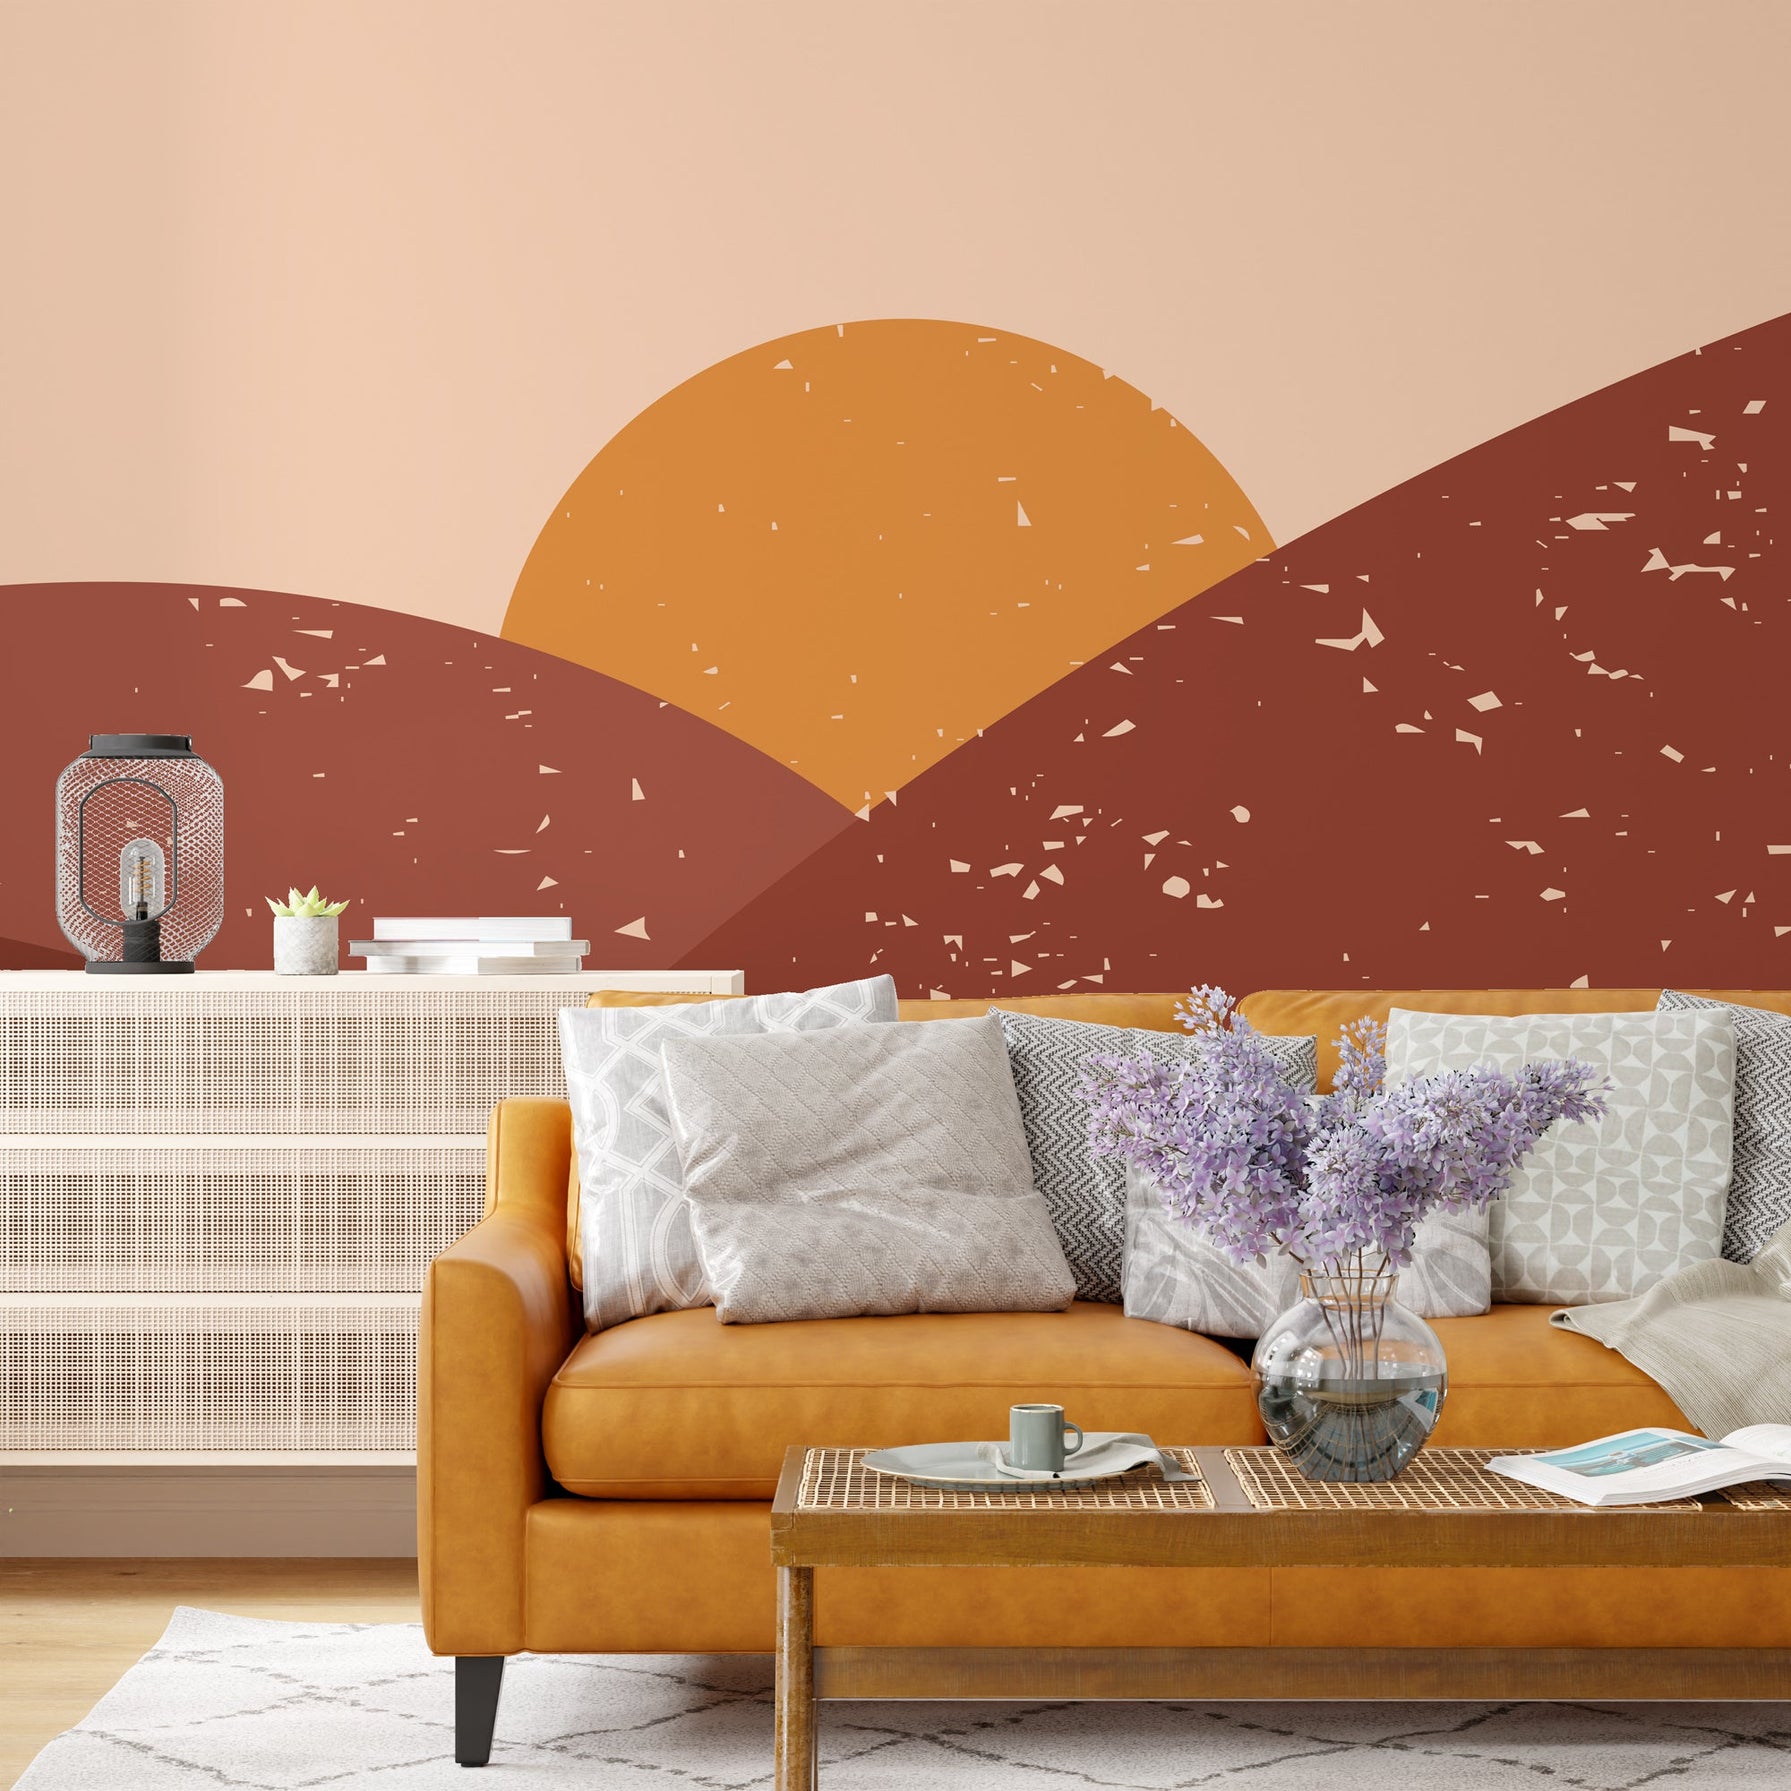 Sunshine Wallpaper Mural: Bring Radiance to Your Space